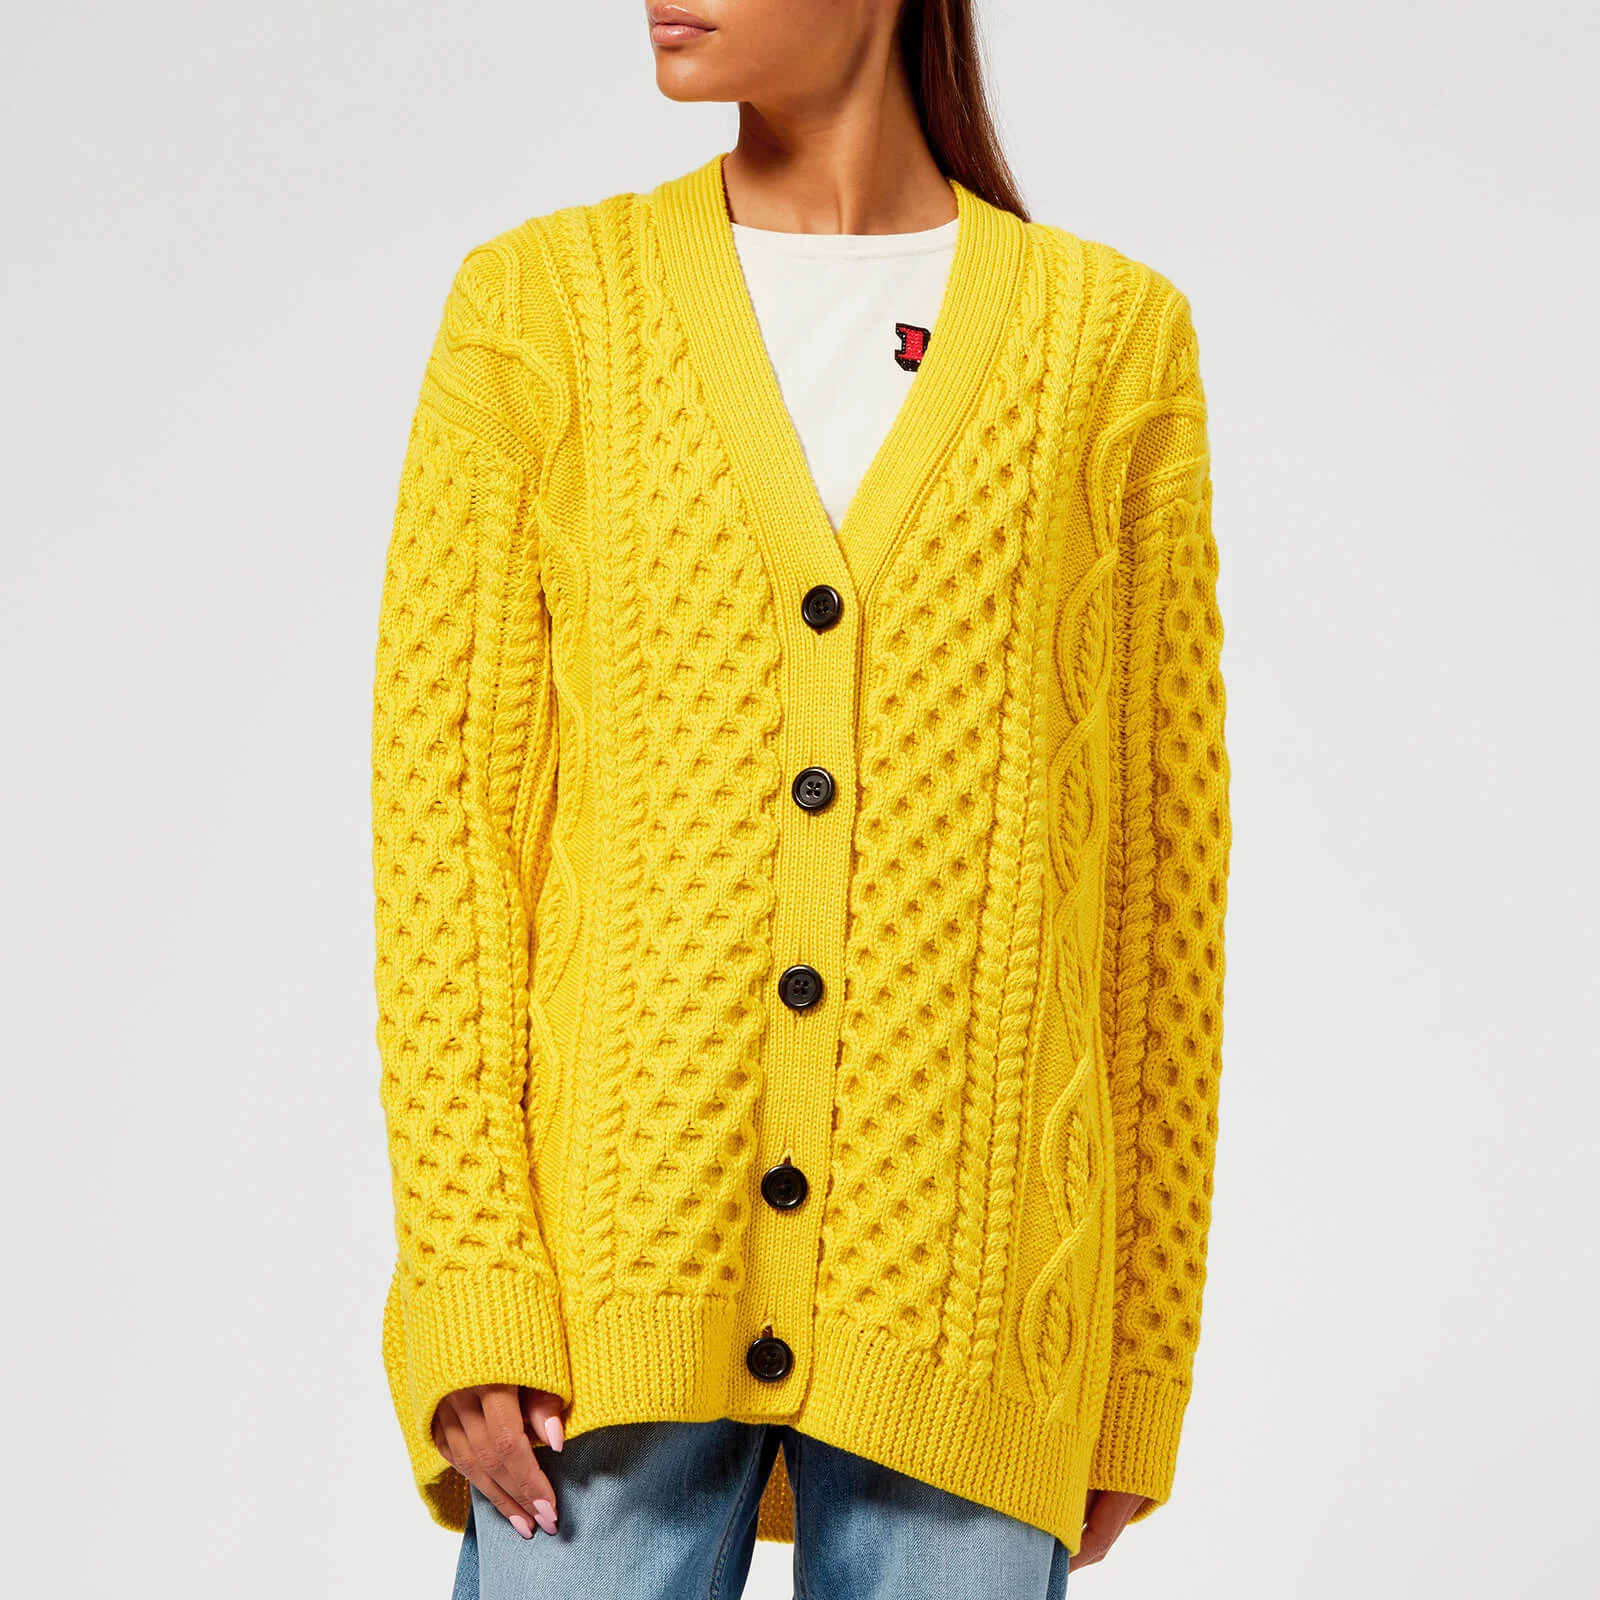 Marc Jacobs Women's Long Sleeve Cable Cardigan - Yellow Image 1